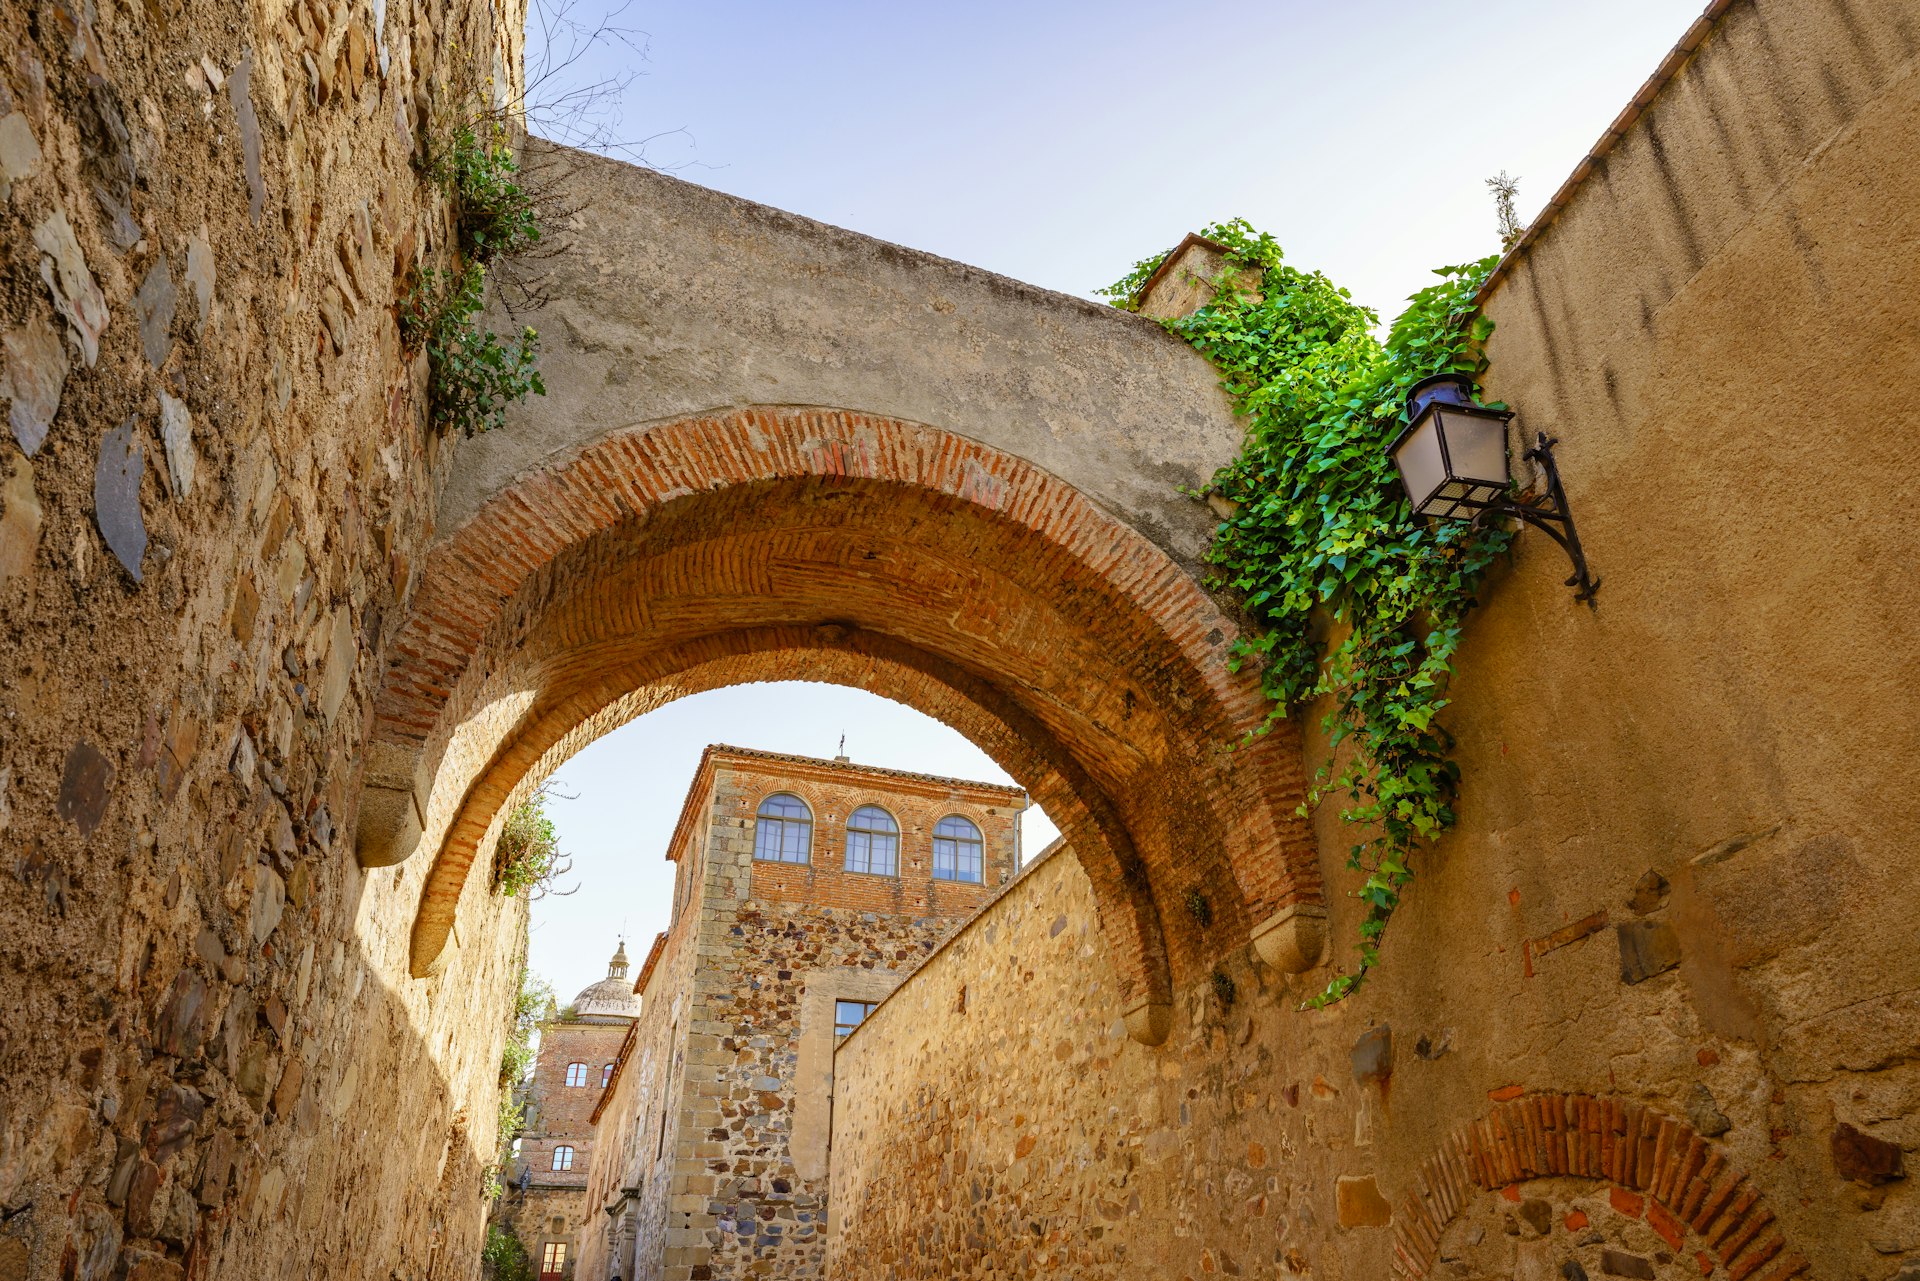 Low angle view of a narrow street under an old arch in Caceres, Extremadura, Spain.